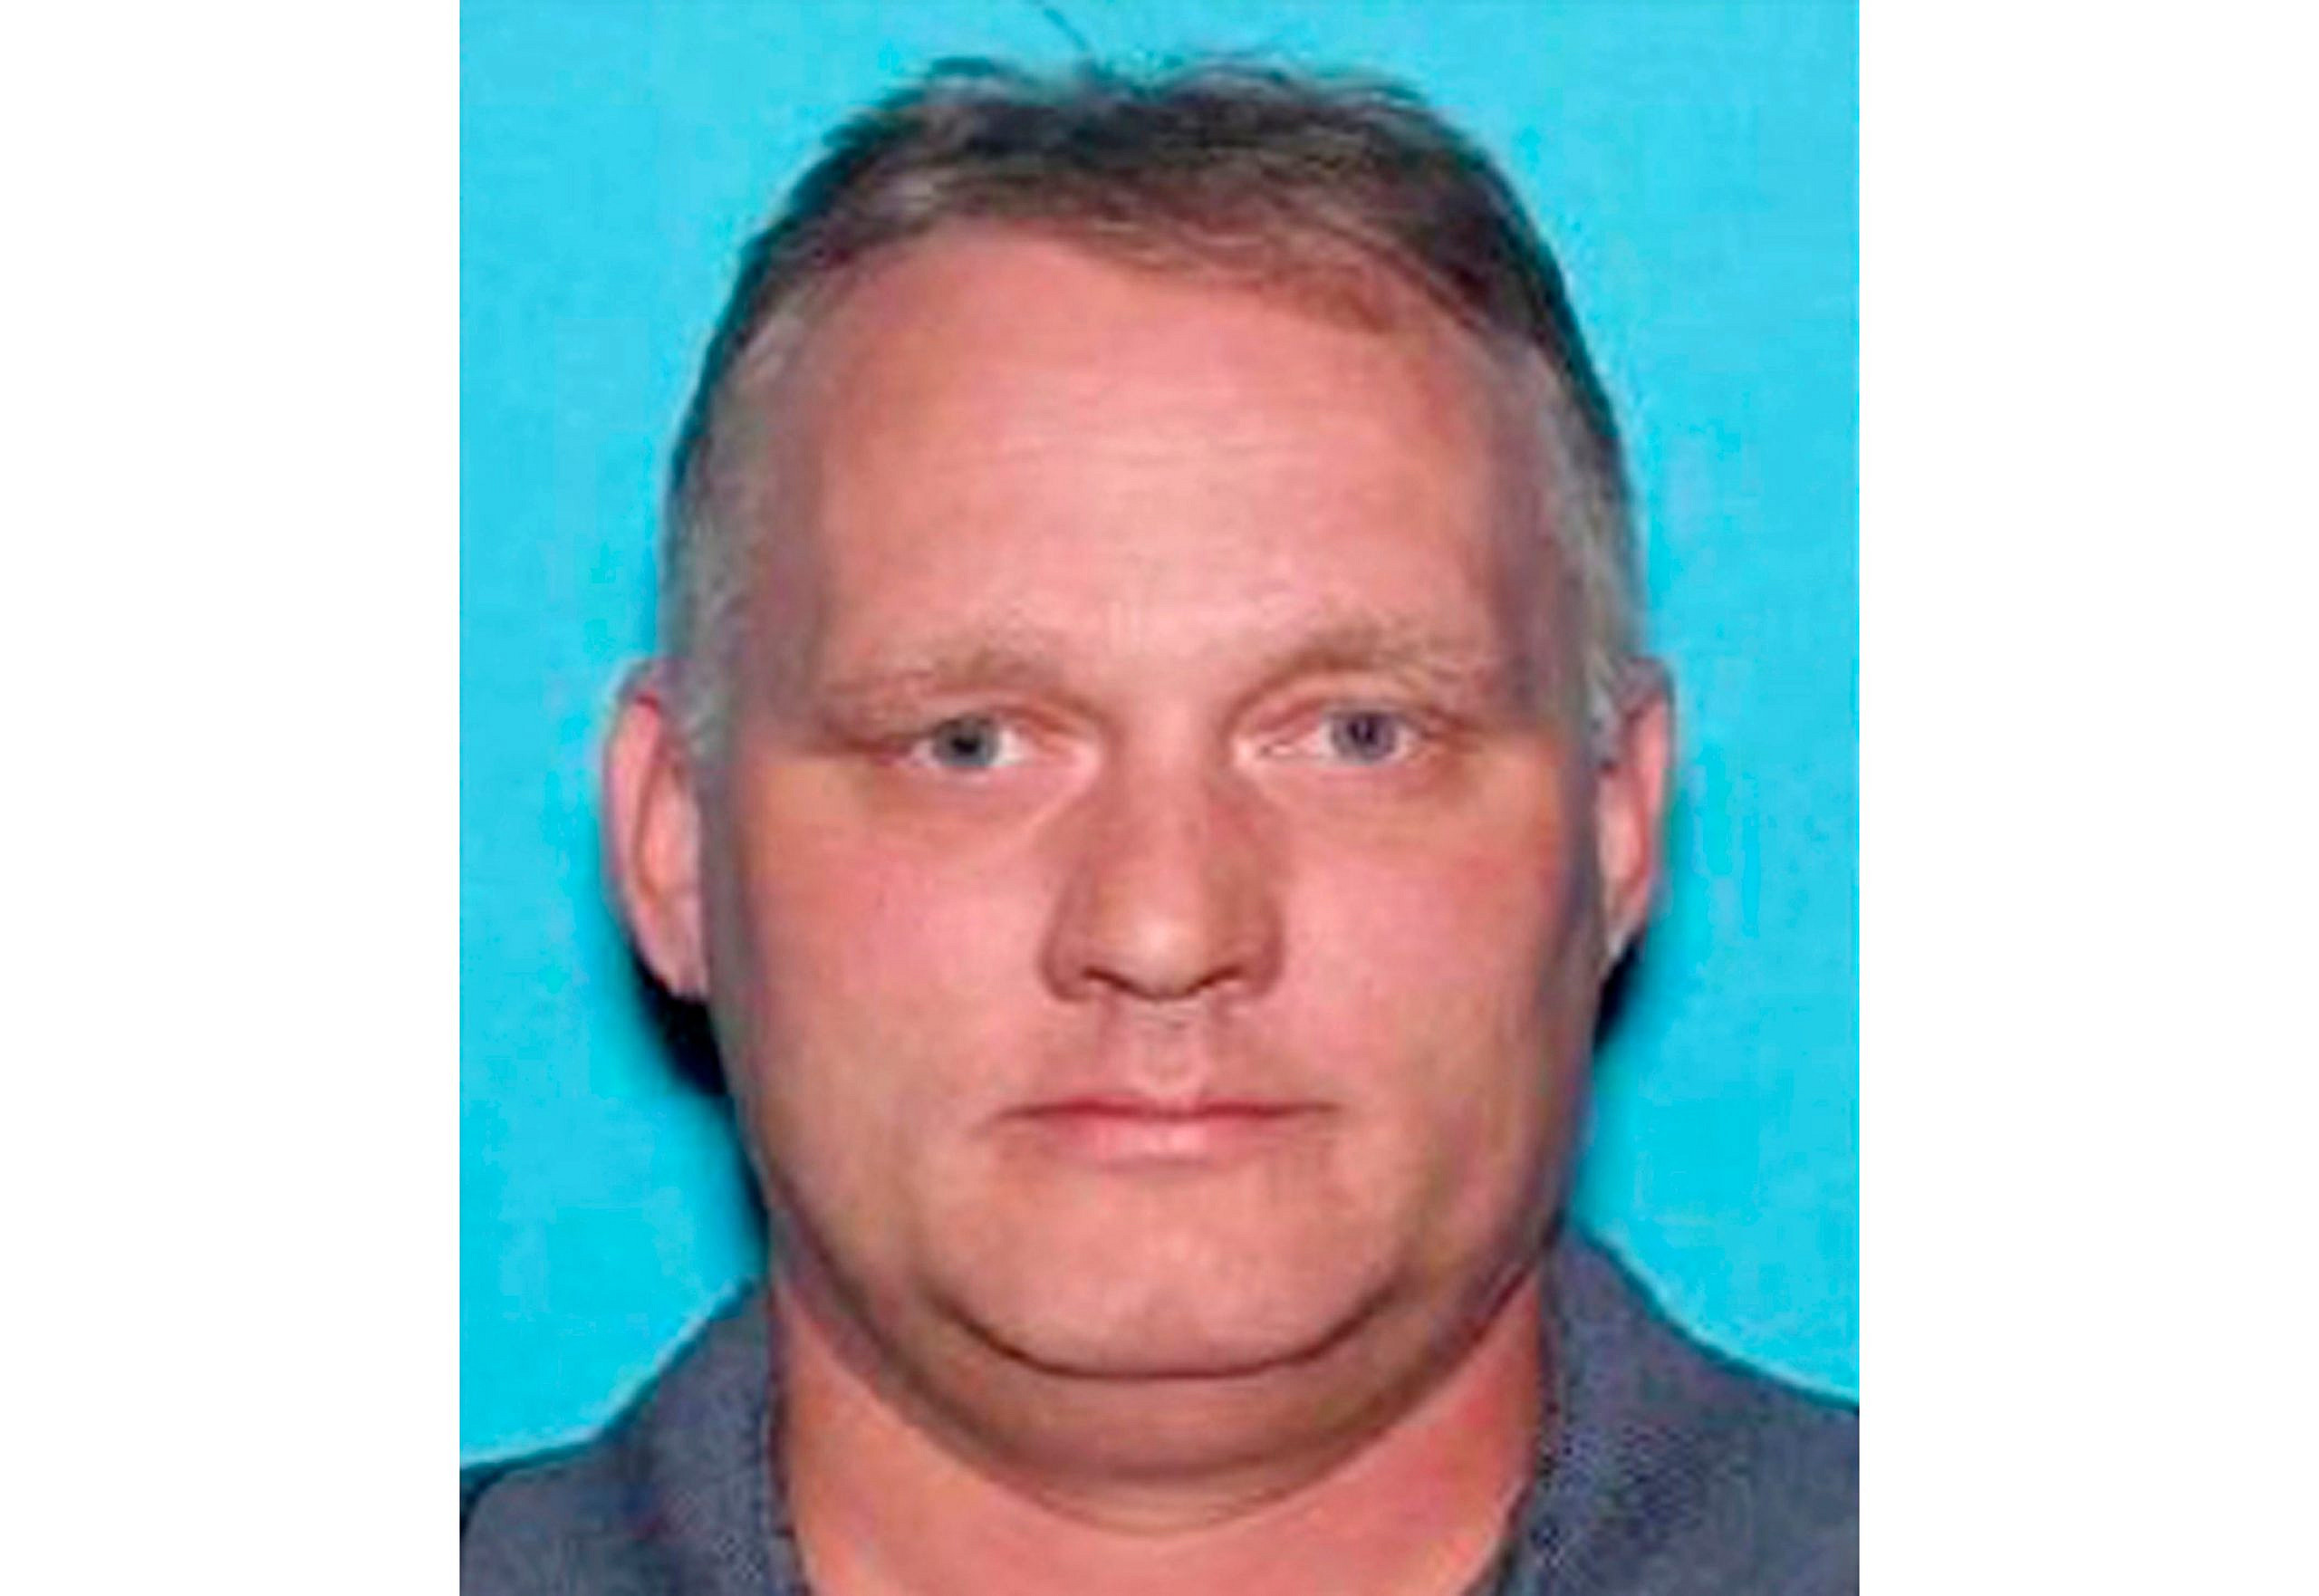 A mug shot of Robert Bowers, the suspect behind the shooting of 11 Jewish worshippers at Tree of Life*Or L’Simcha Synagogue in Pittsburgh on Oct. 27, 2018. Credit: Pennsylvania Department of Transportation.